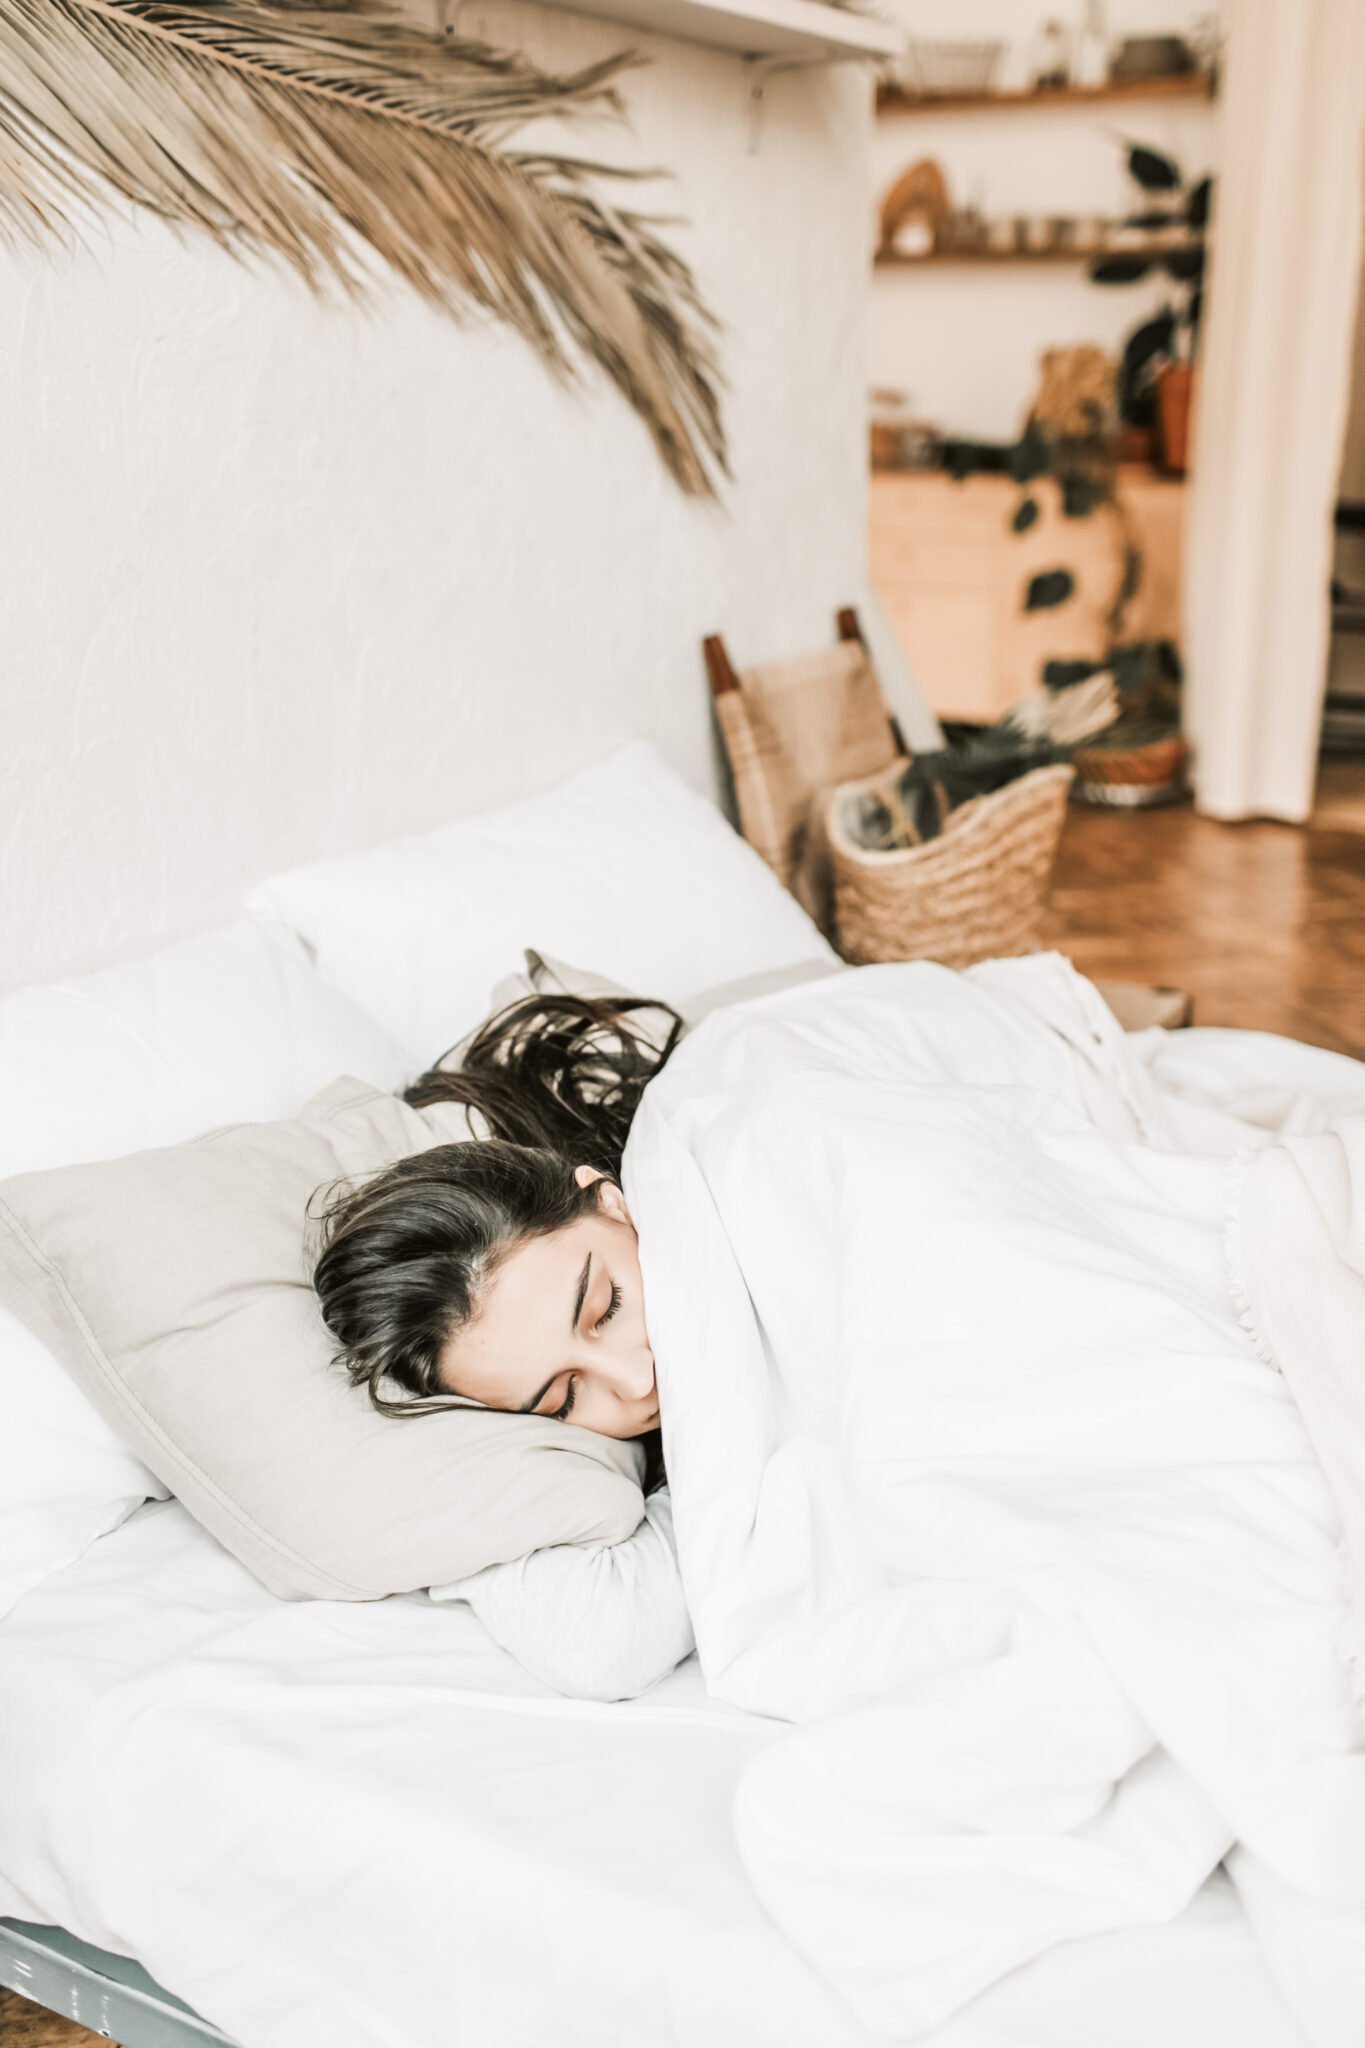 How To Prevent Recurring Nightmares & Sleep Better